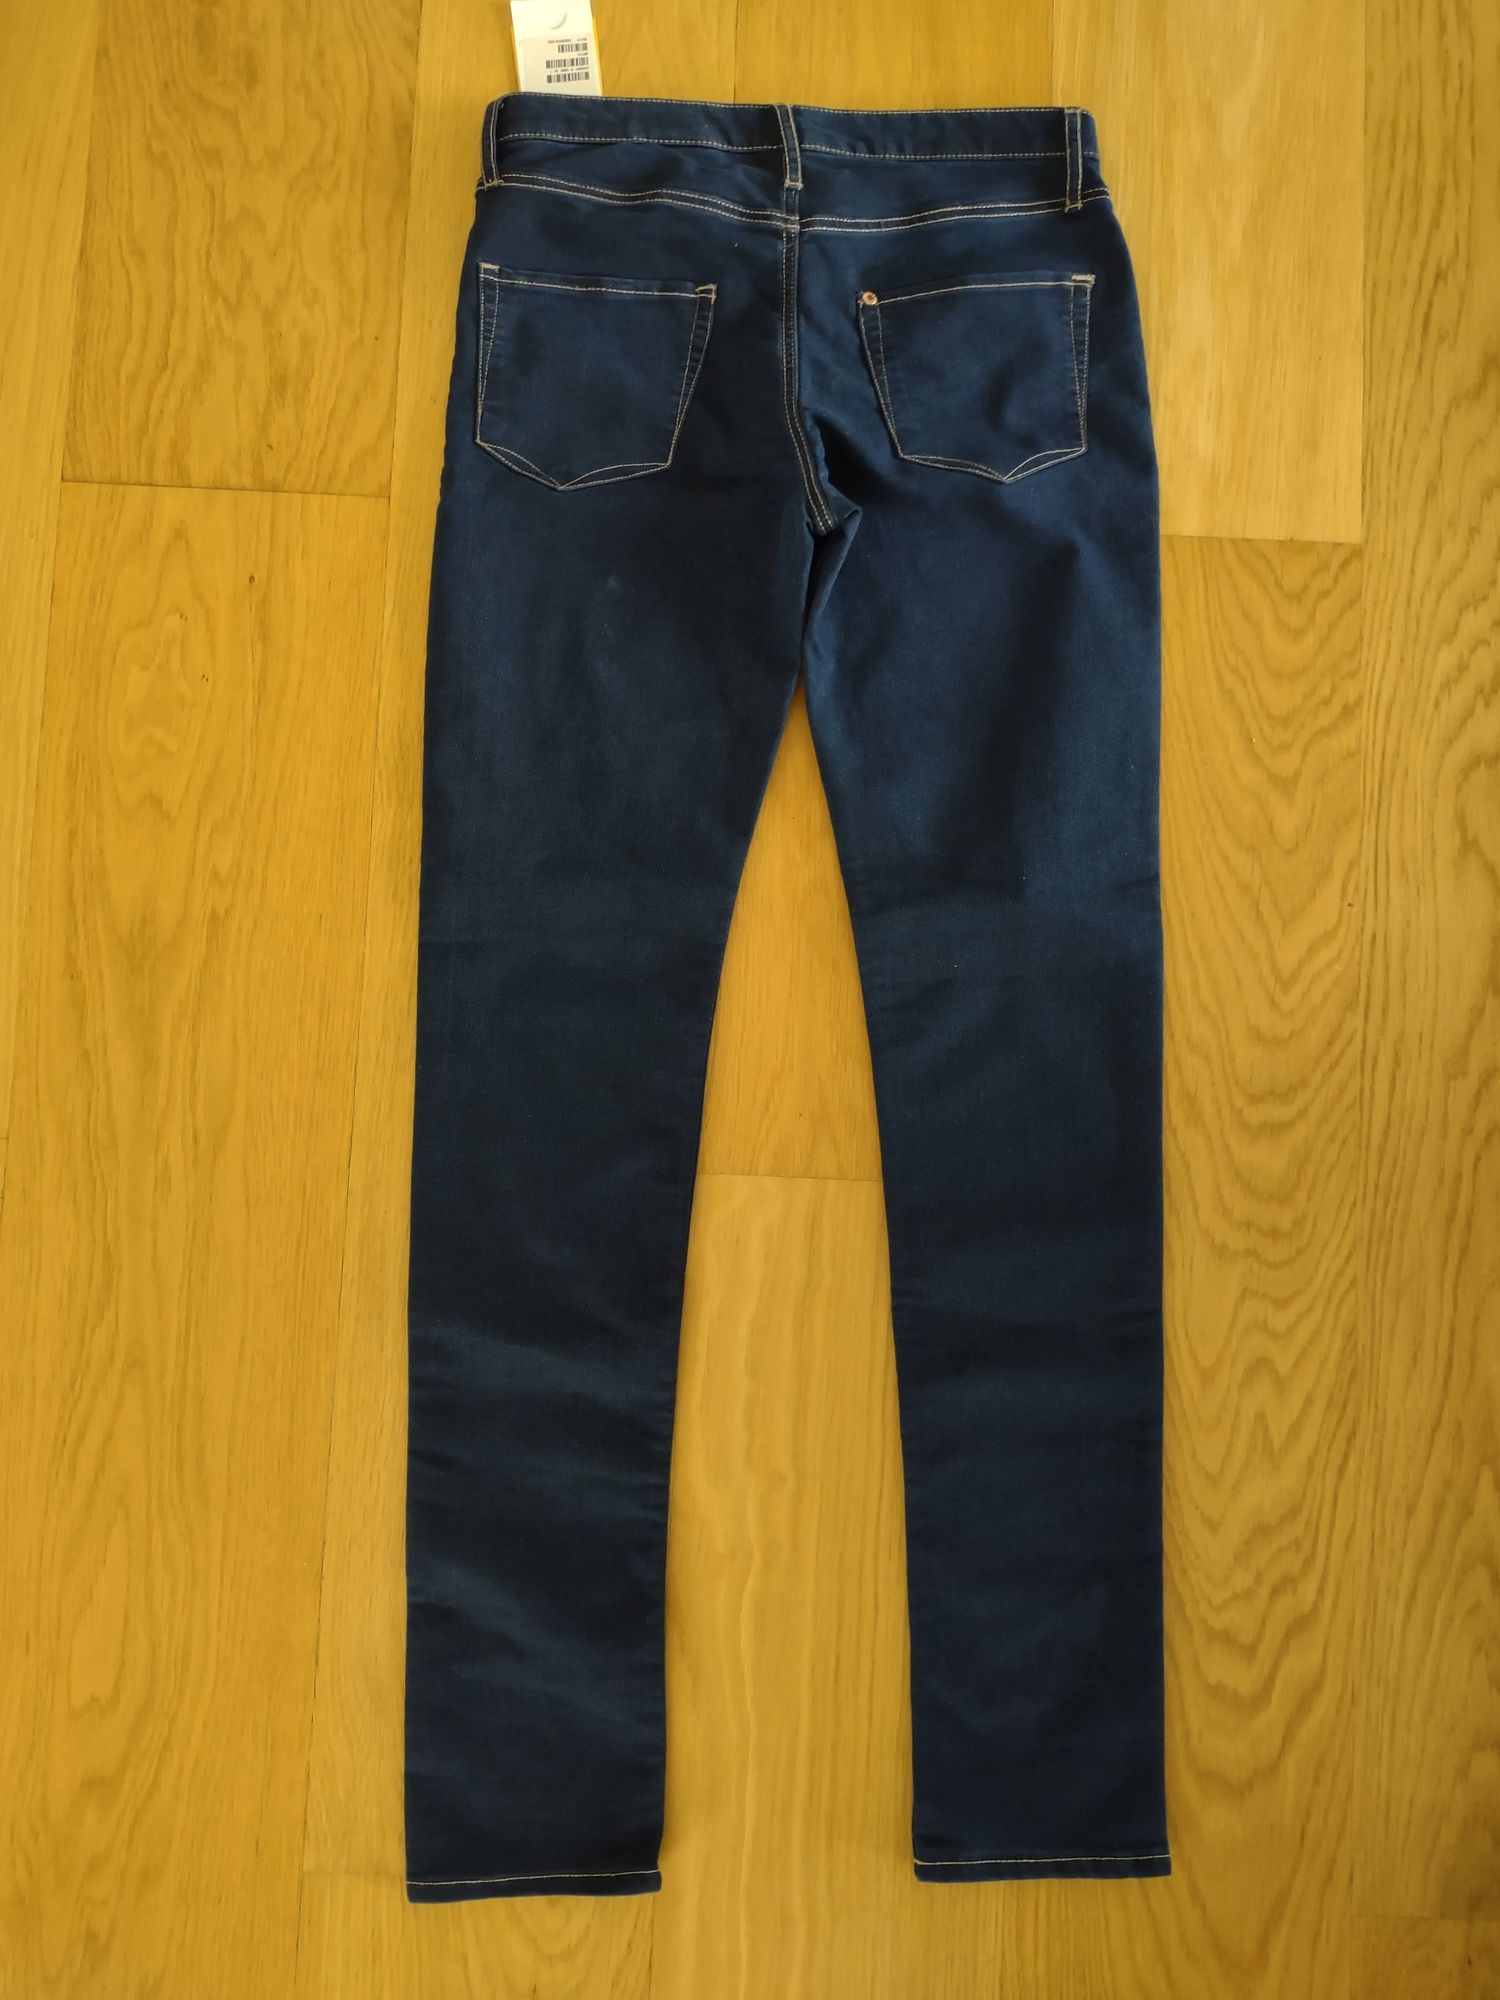 NOWE Jeansy super skinny fit, H&M, 158